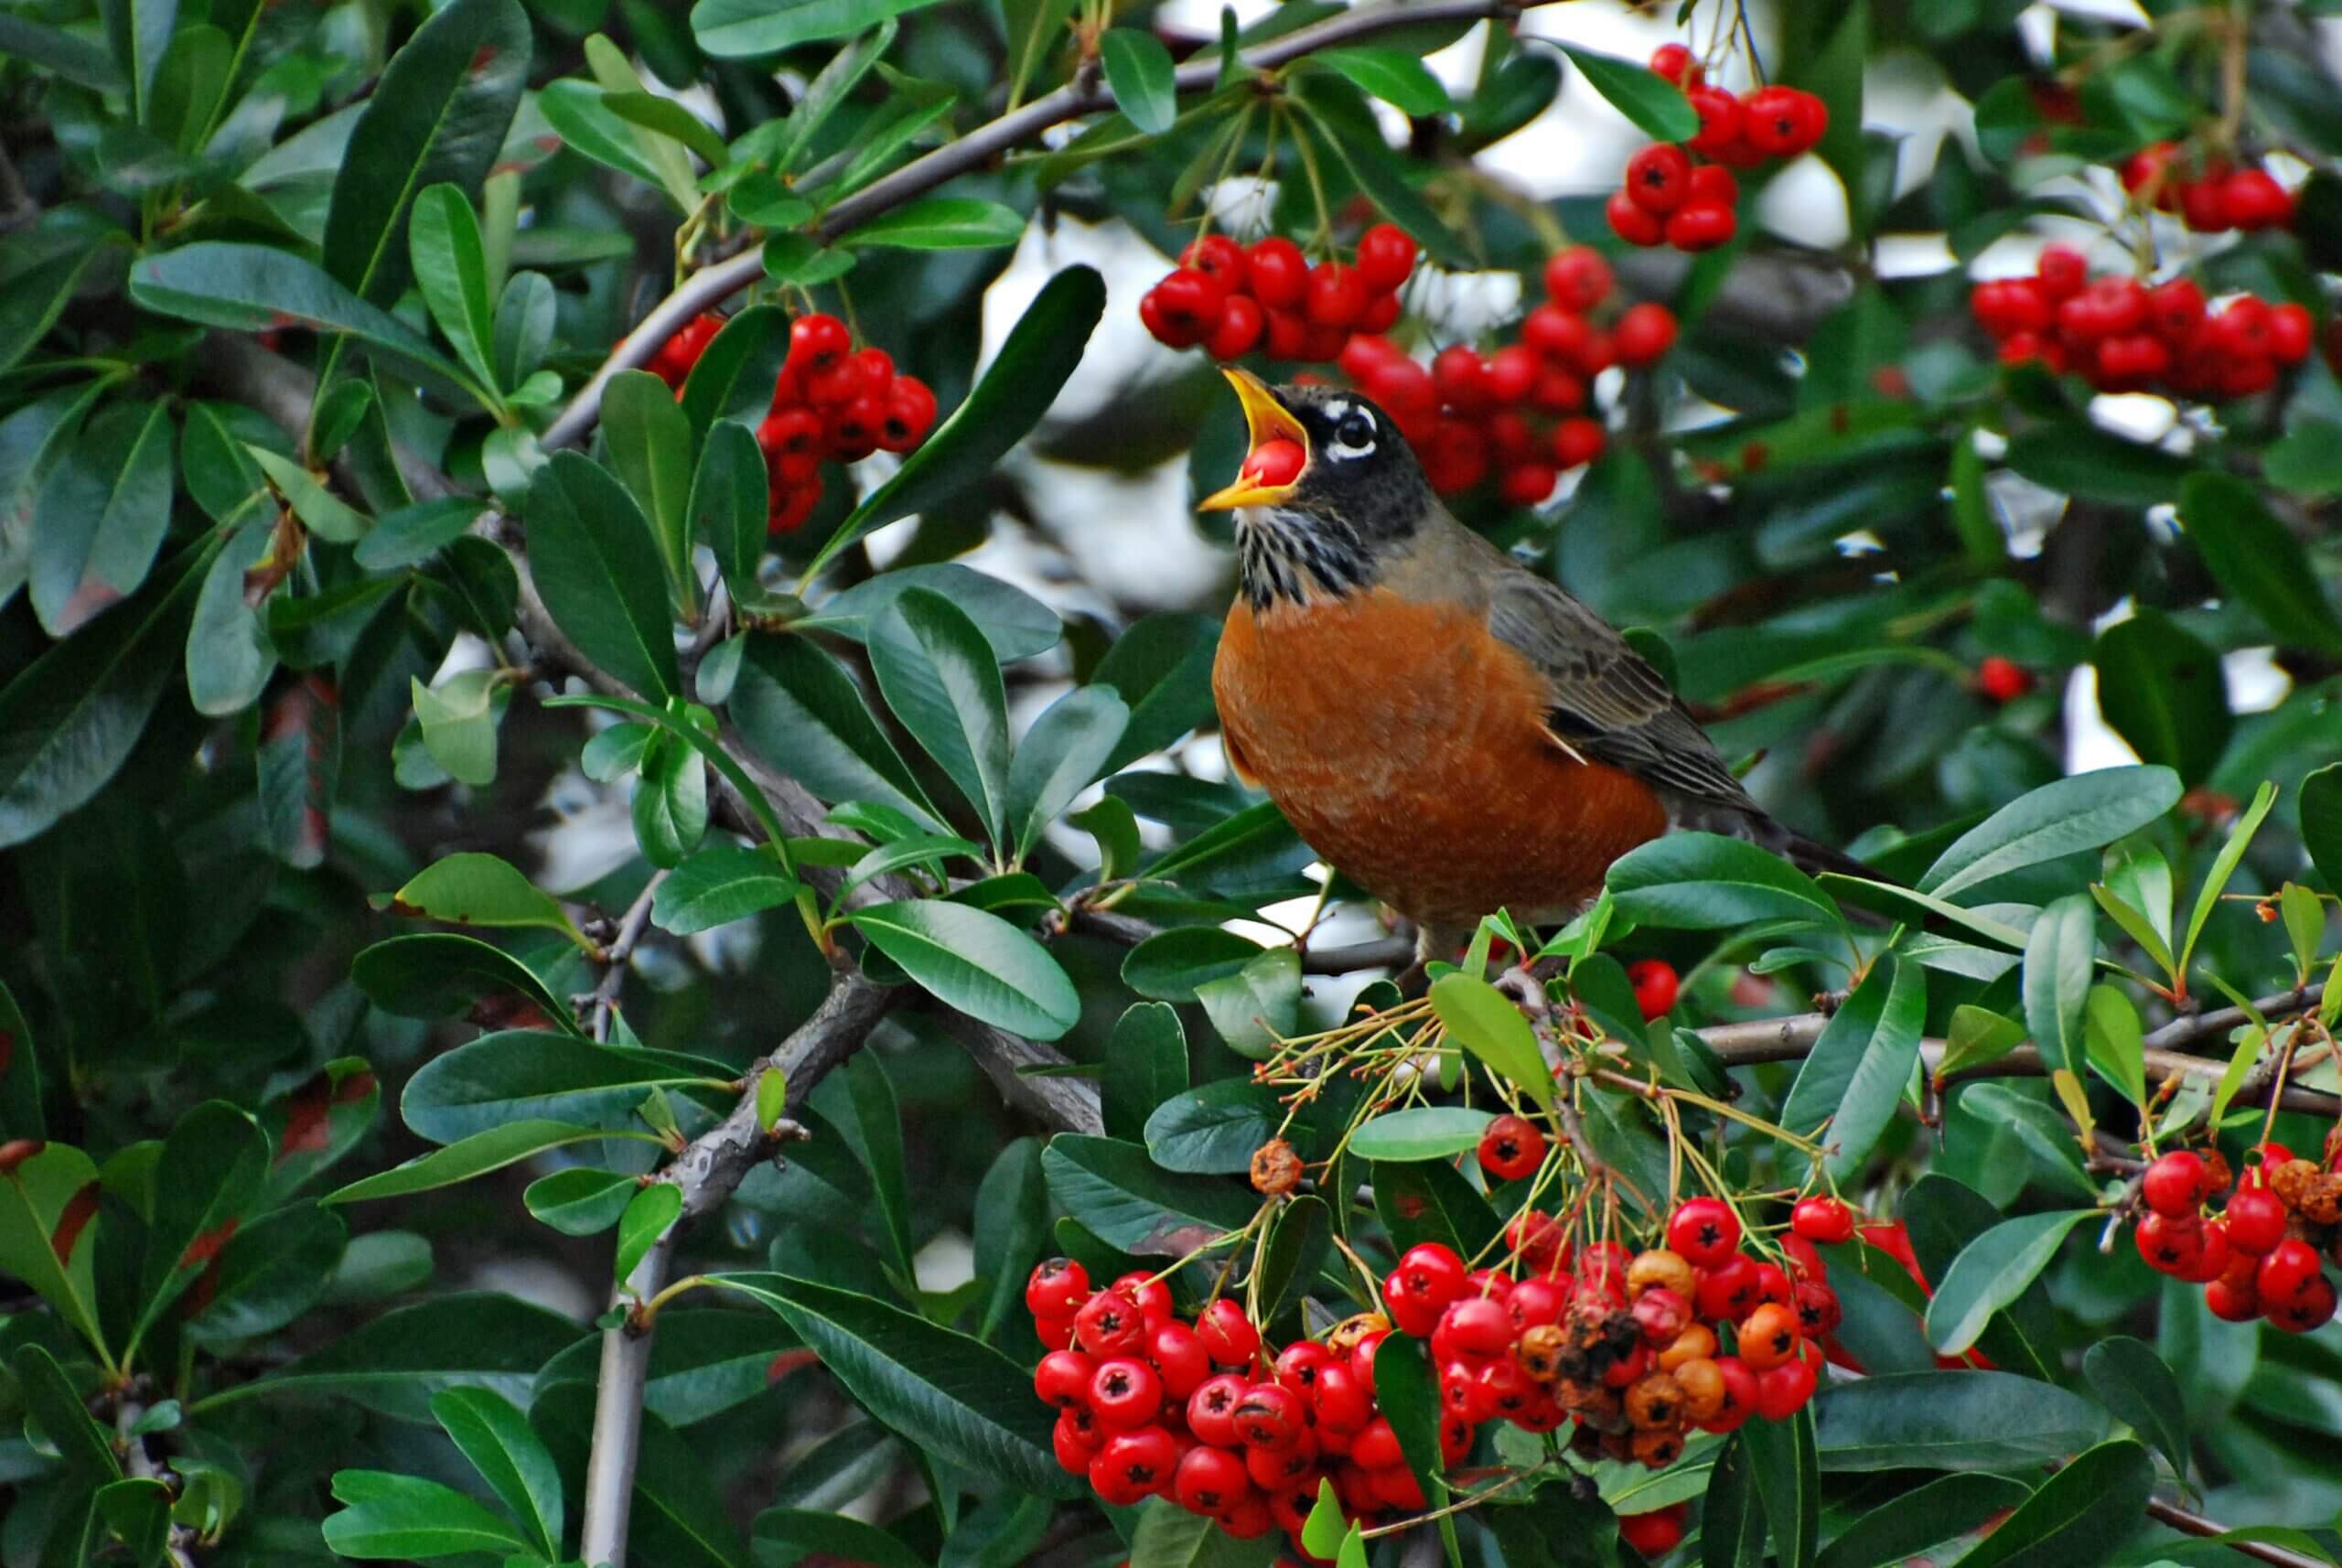 American Robin eating a Pyracantha berry